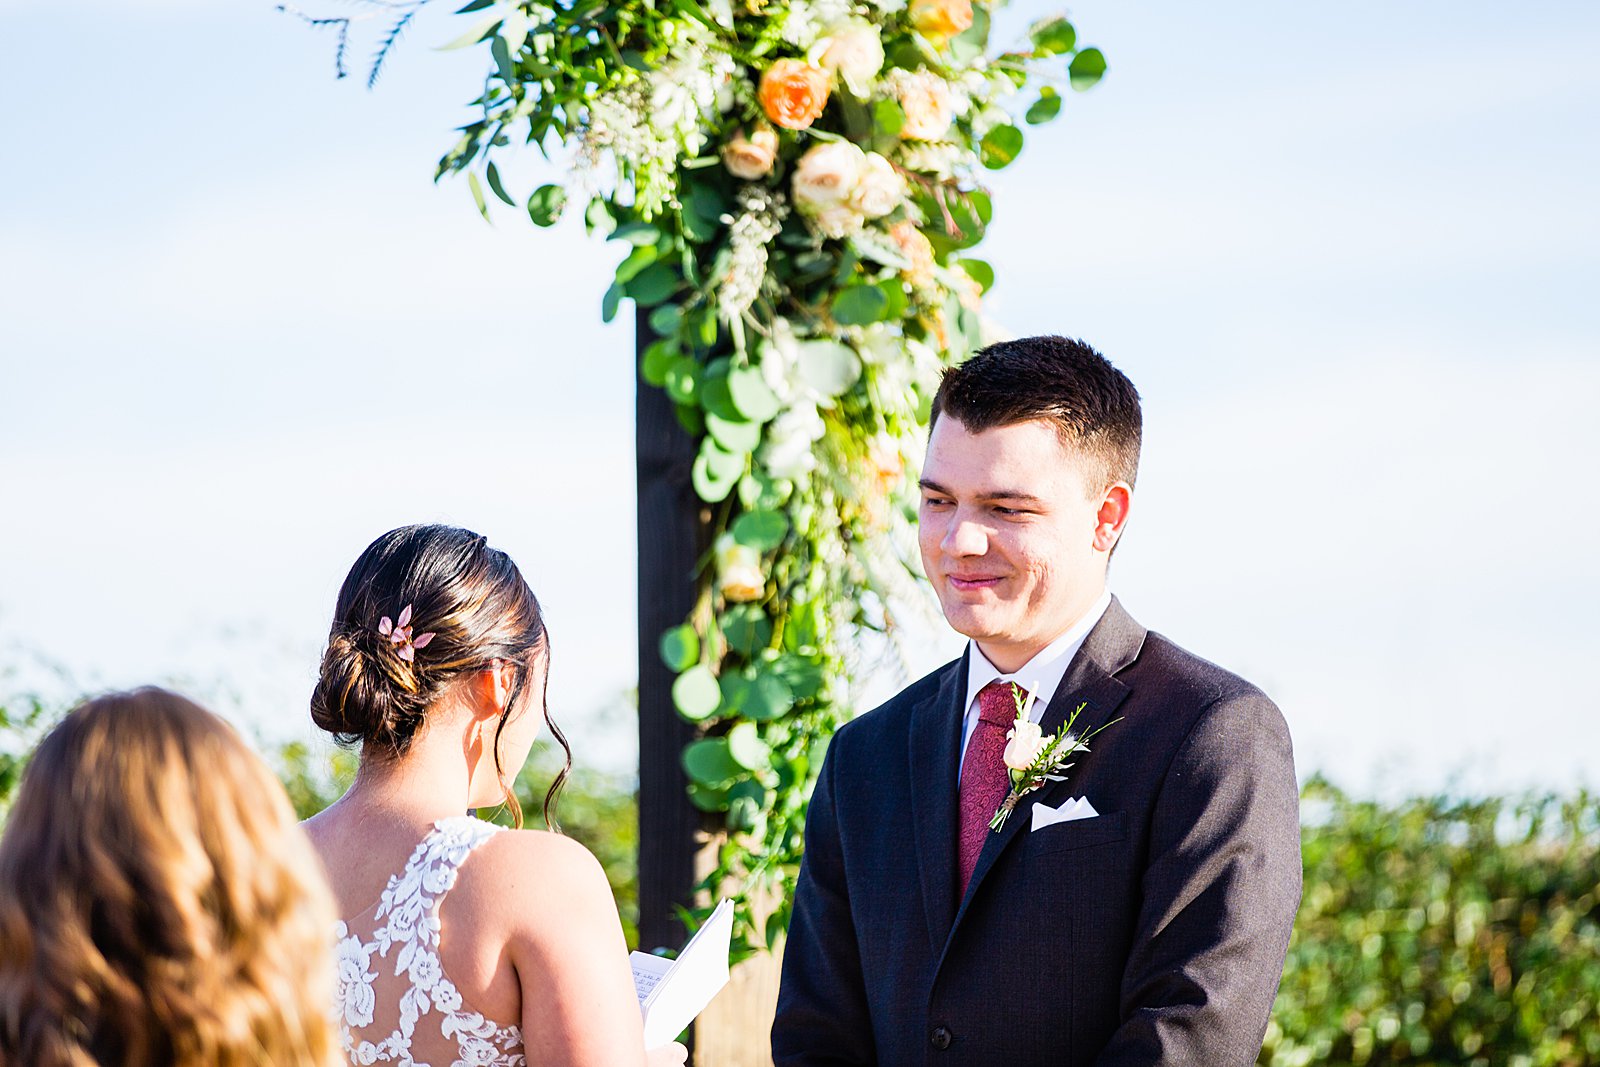 Groom looking at his bride during their wedding ceremony at The Paseo by Apache Junction wedding photographer PMA Photography.